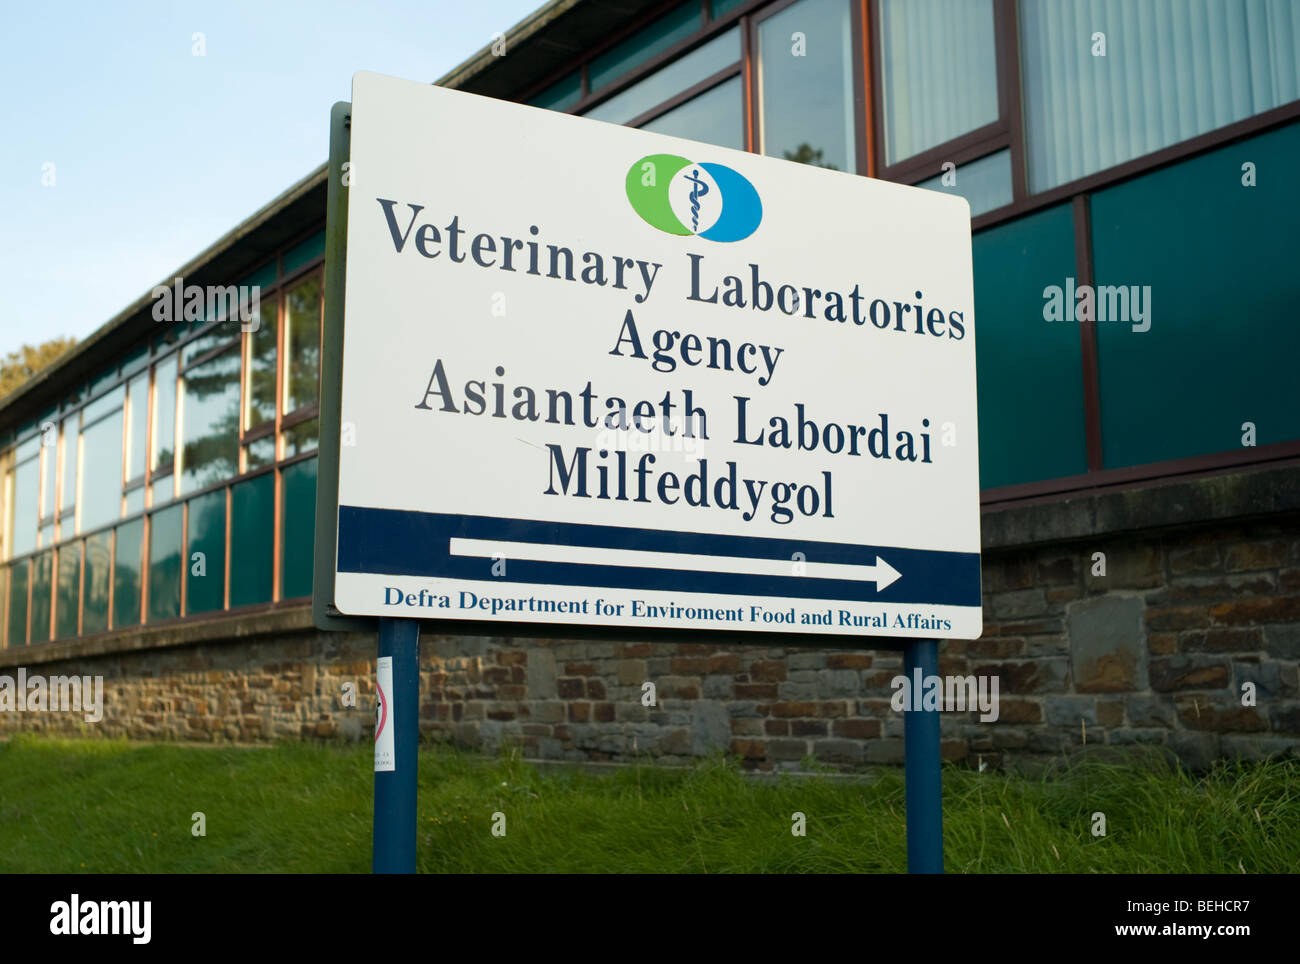 DEFRA (department for environment food and rural affairs) Veterinary Agency Laboratories, Wales UK Stock Photo